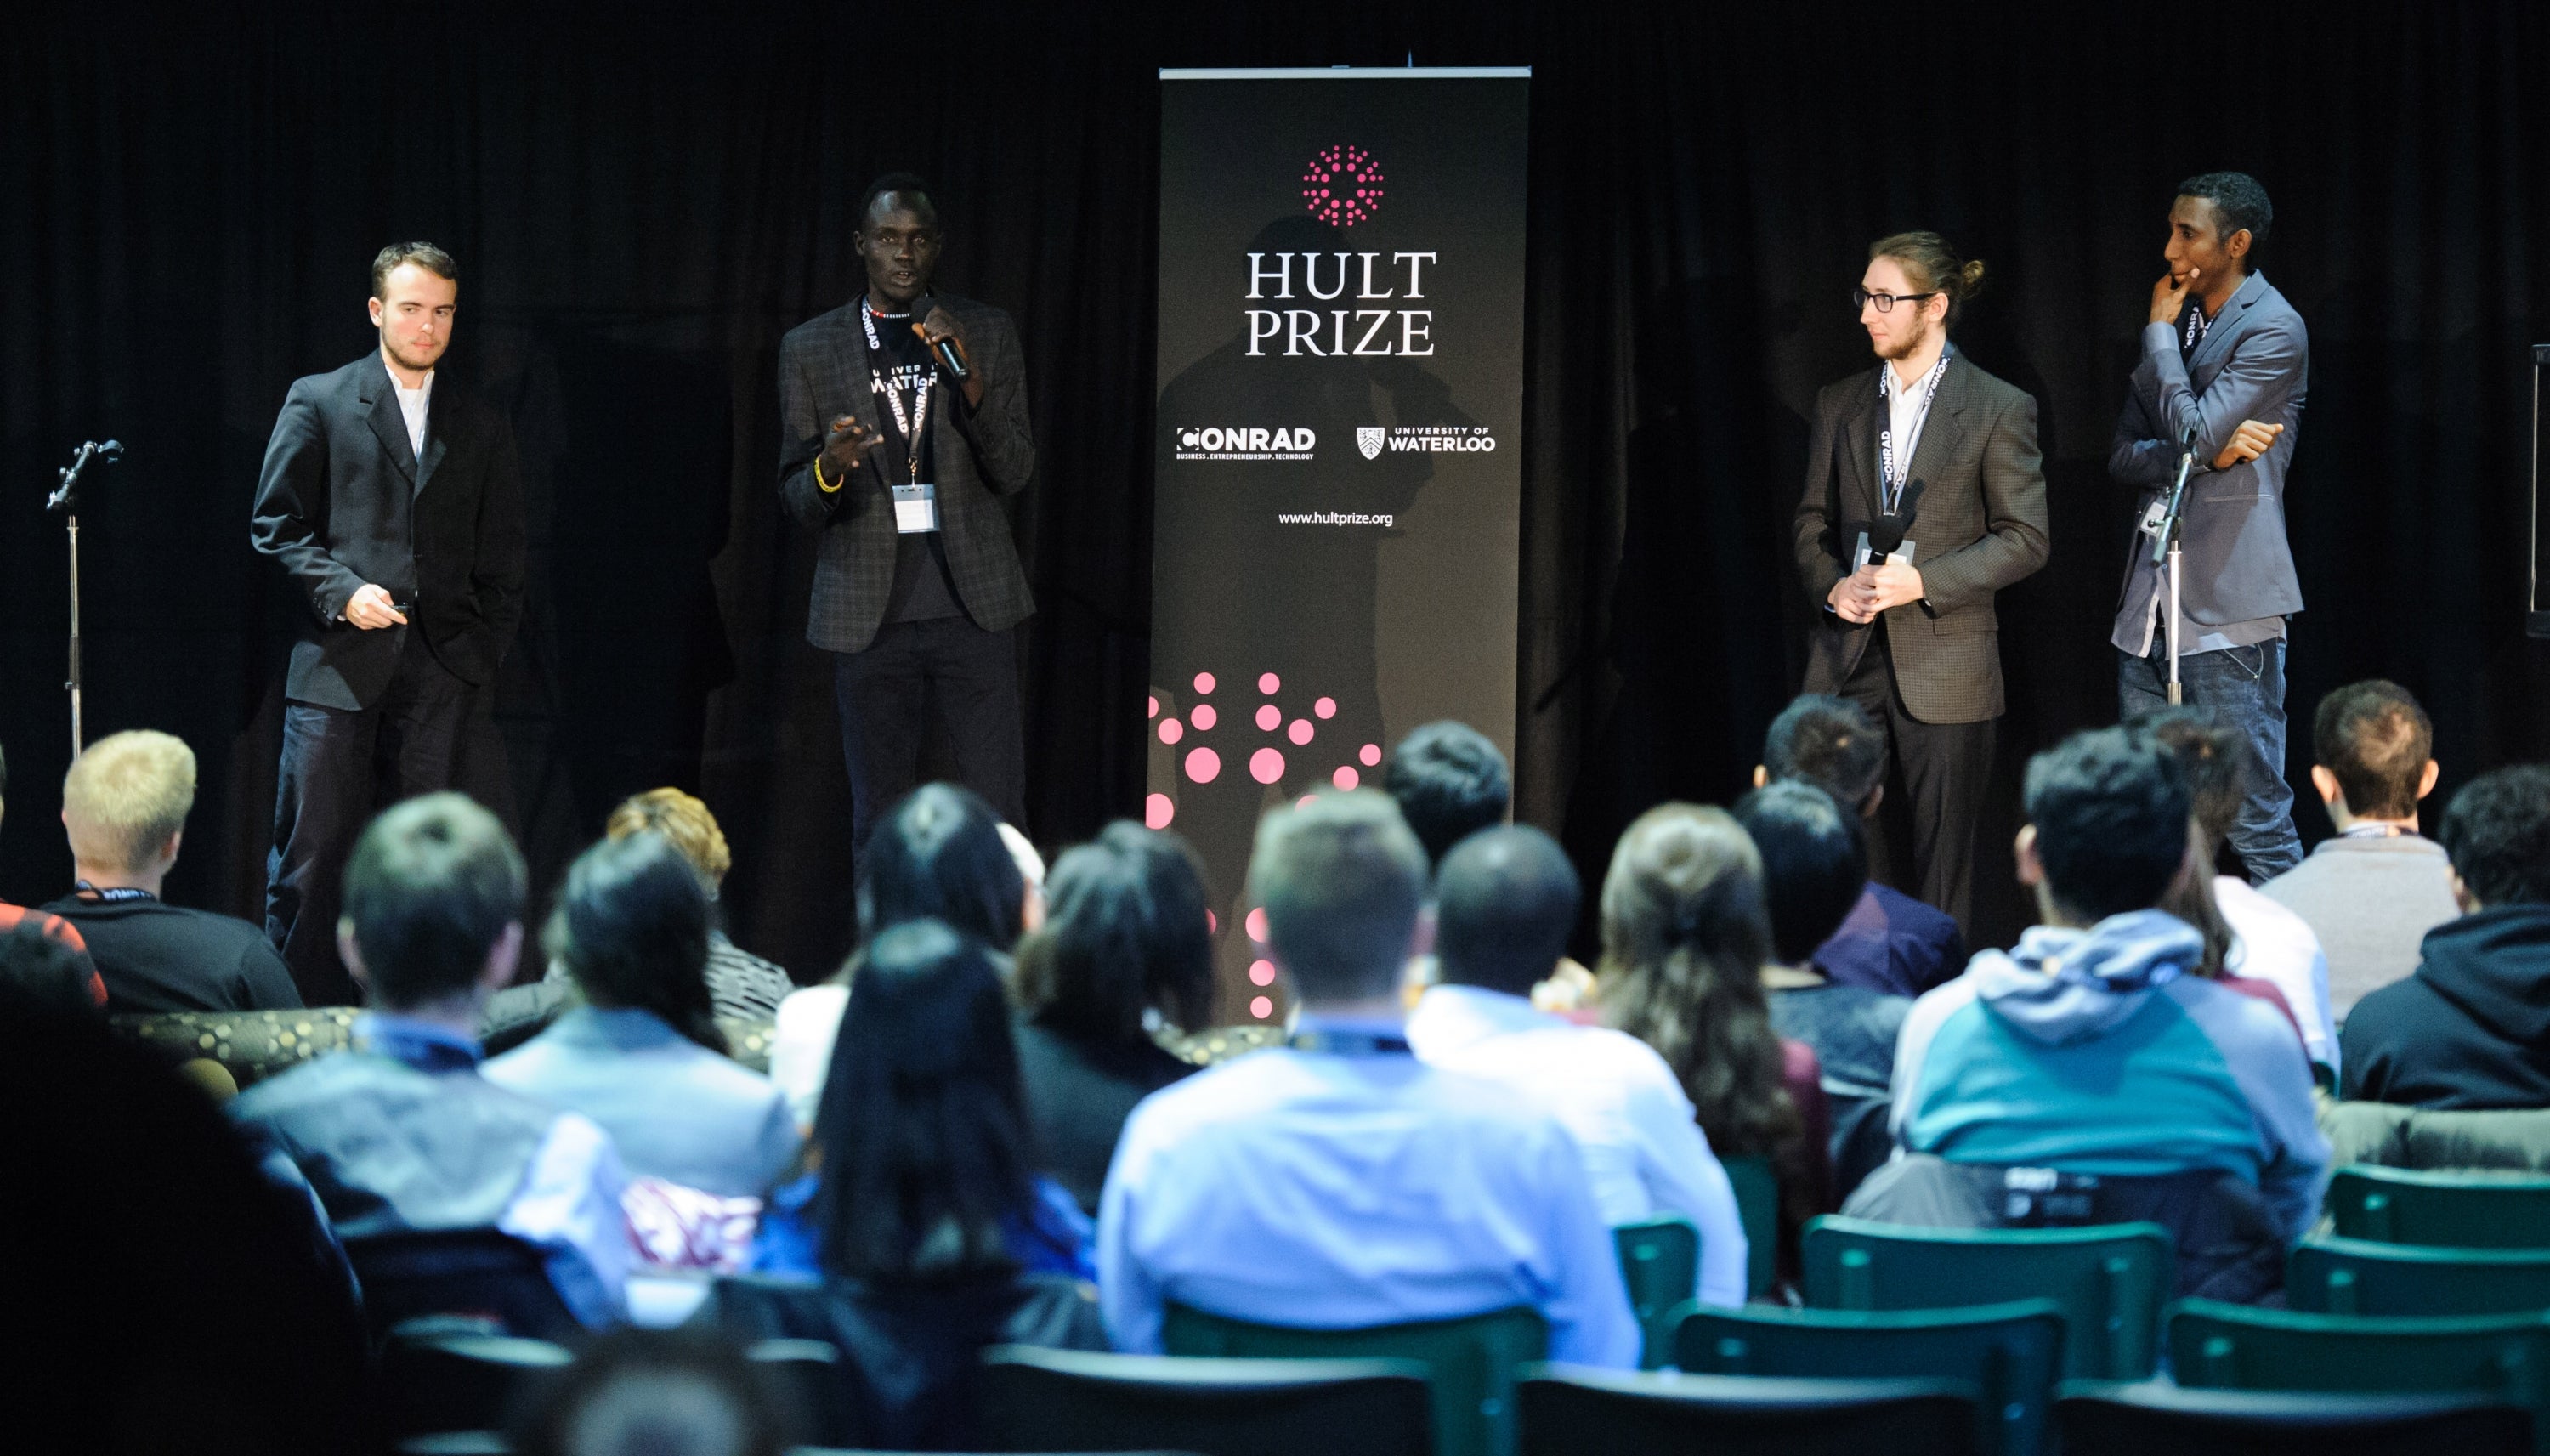 Students participated in the Hult Prize competition at University of Waterloo on November 24